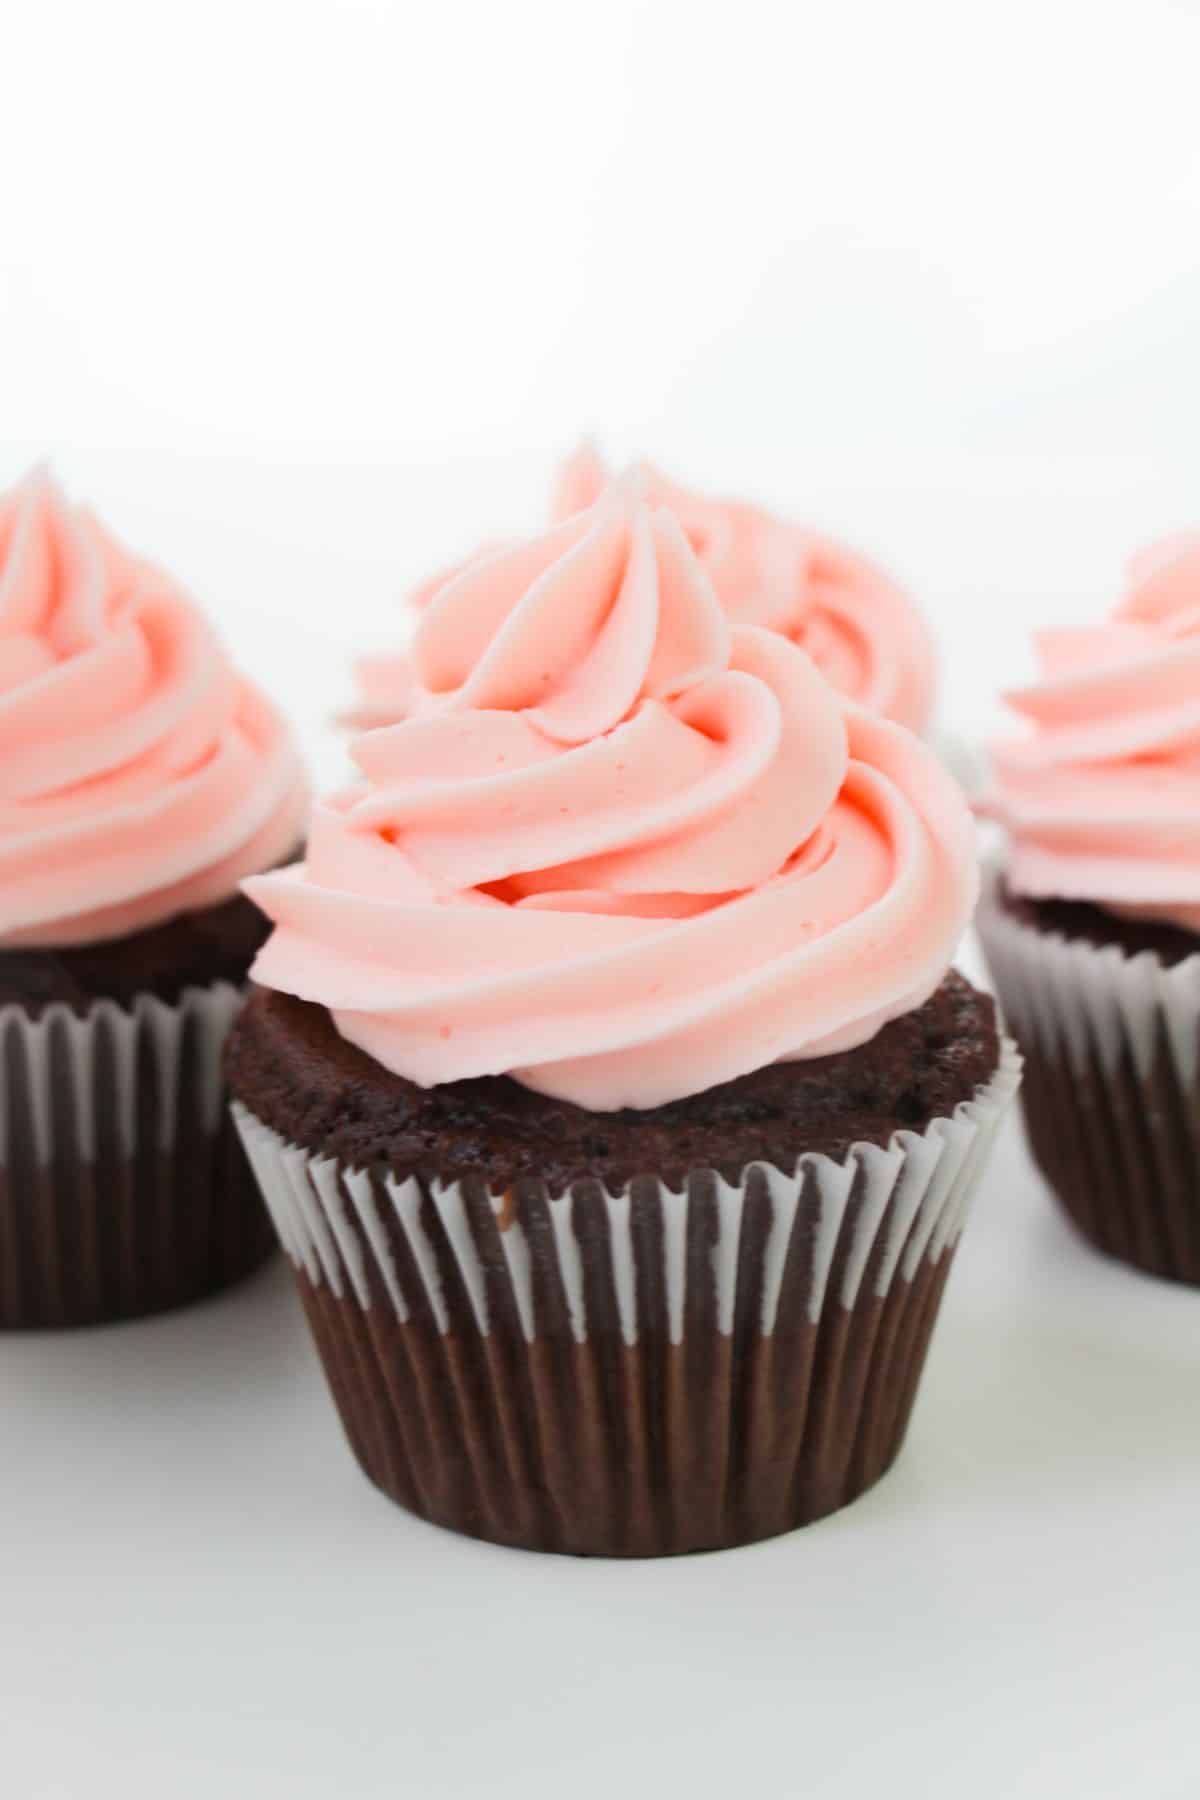 chocolate cupcakes with strawberry frosting.